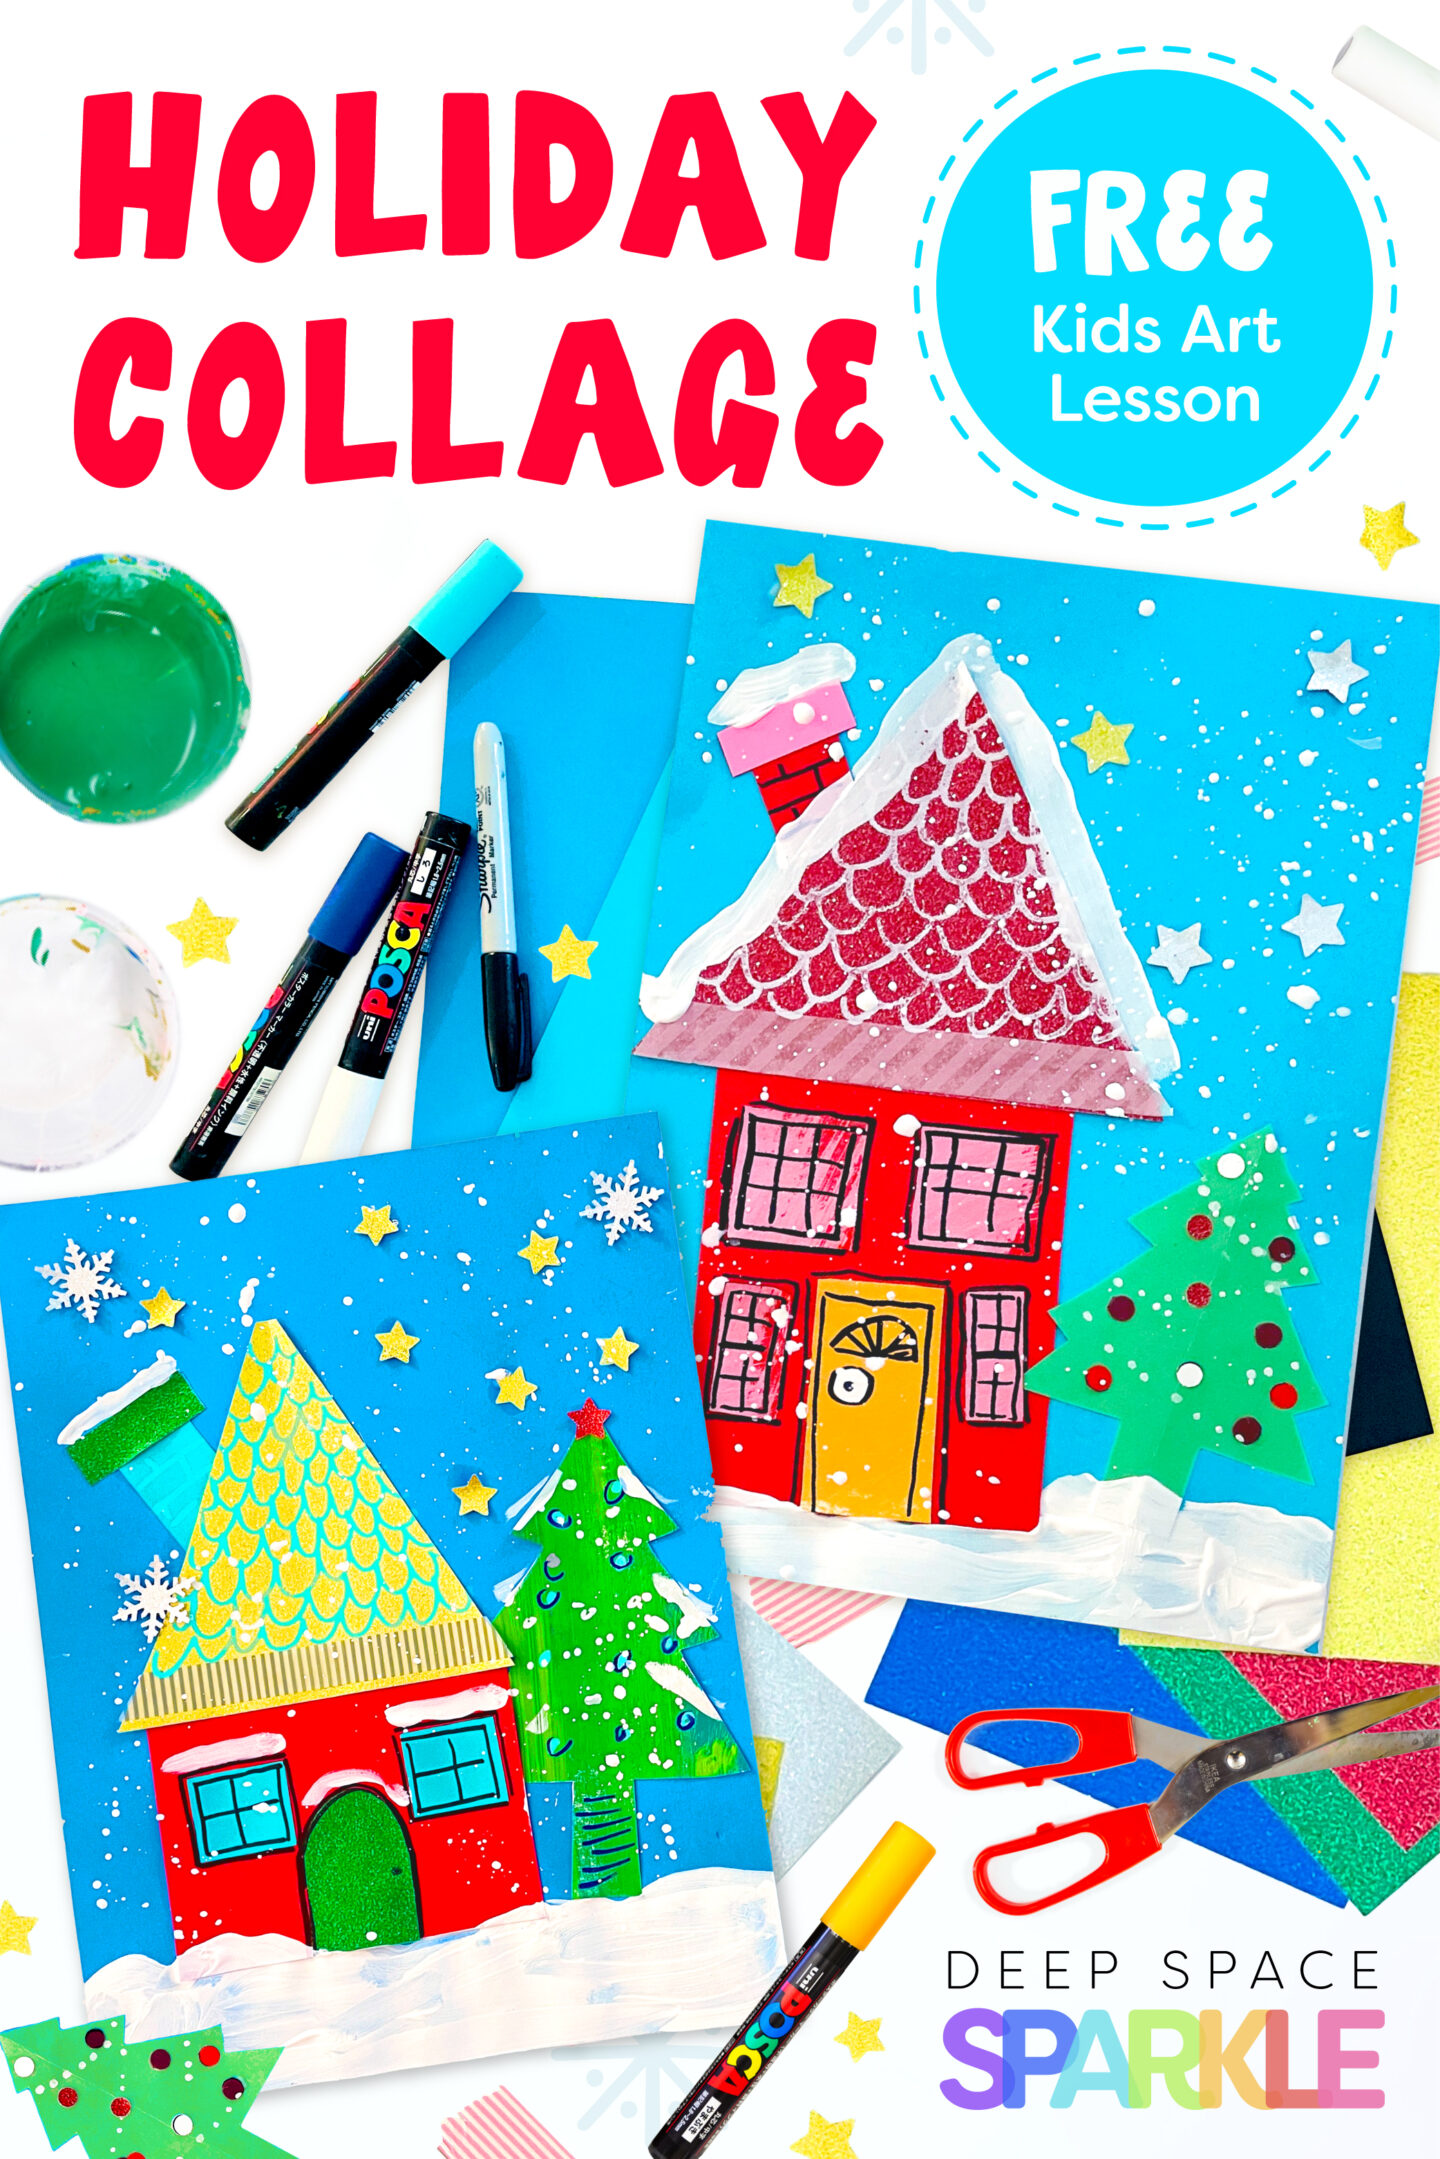 How to make a winter holiday cabin in the woods | Art Project for Kids